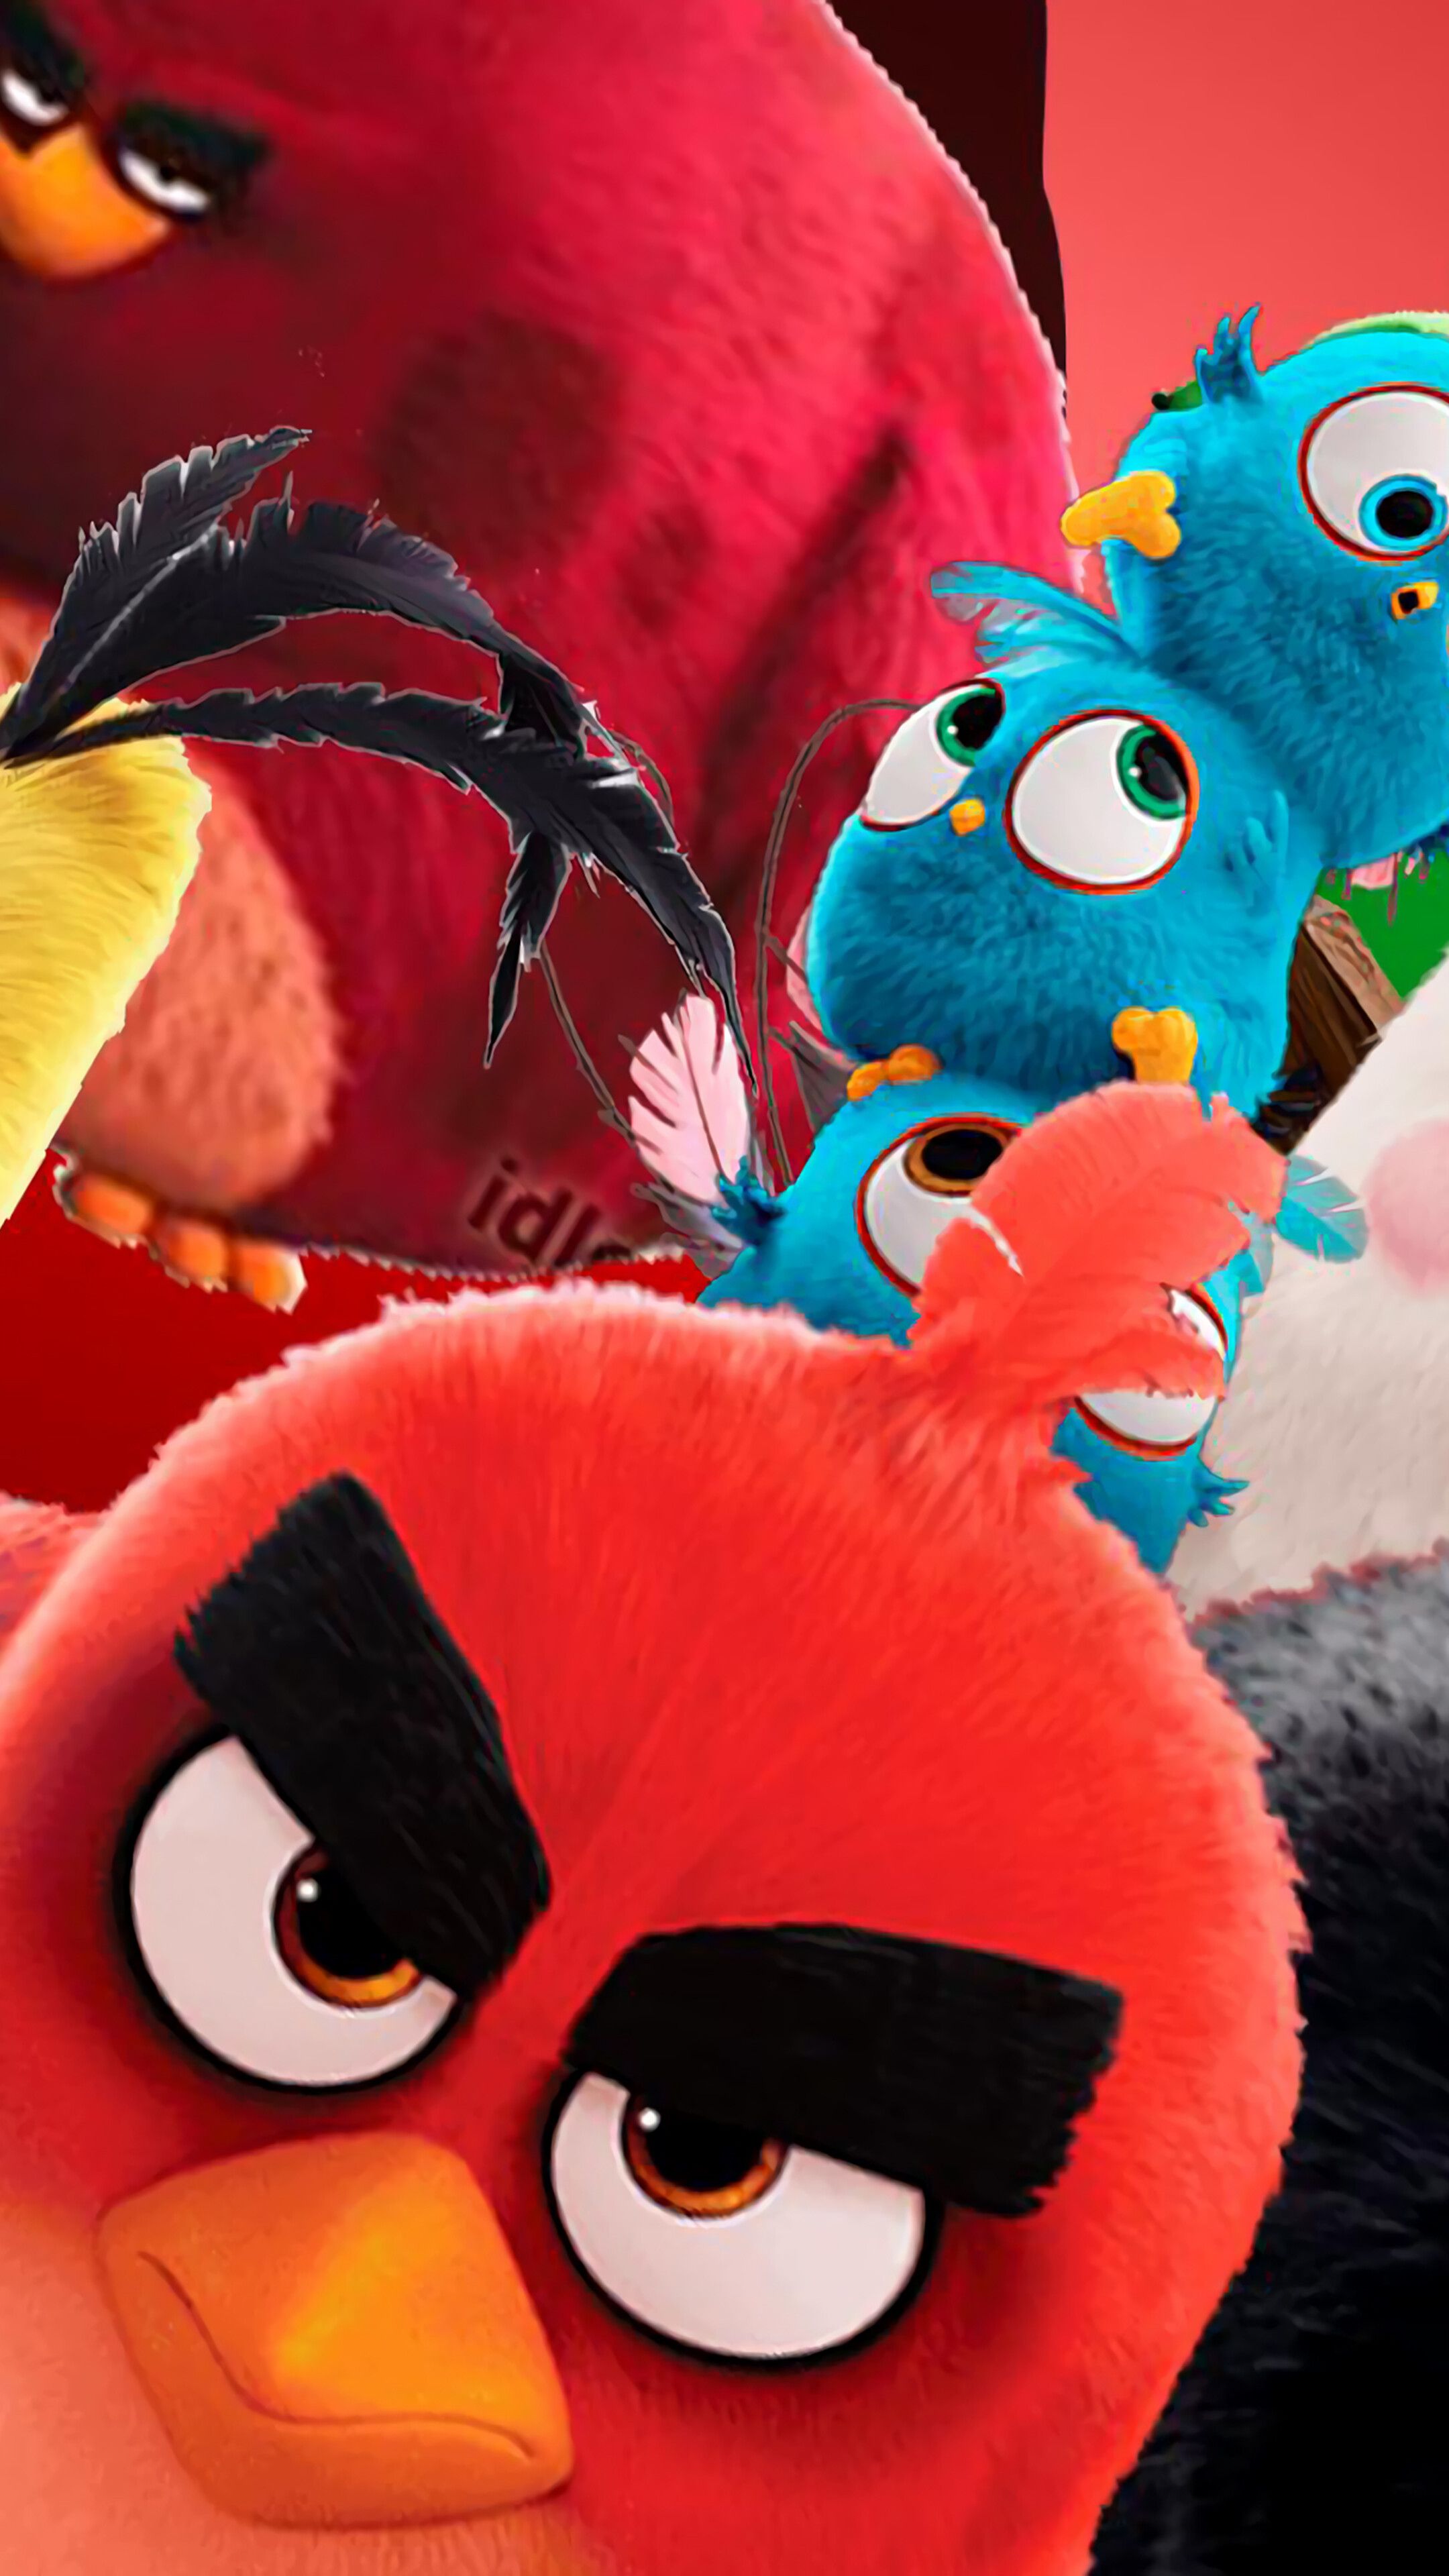 4k Mobile Angry Birds Wallpapers - Wallpaper Cave